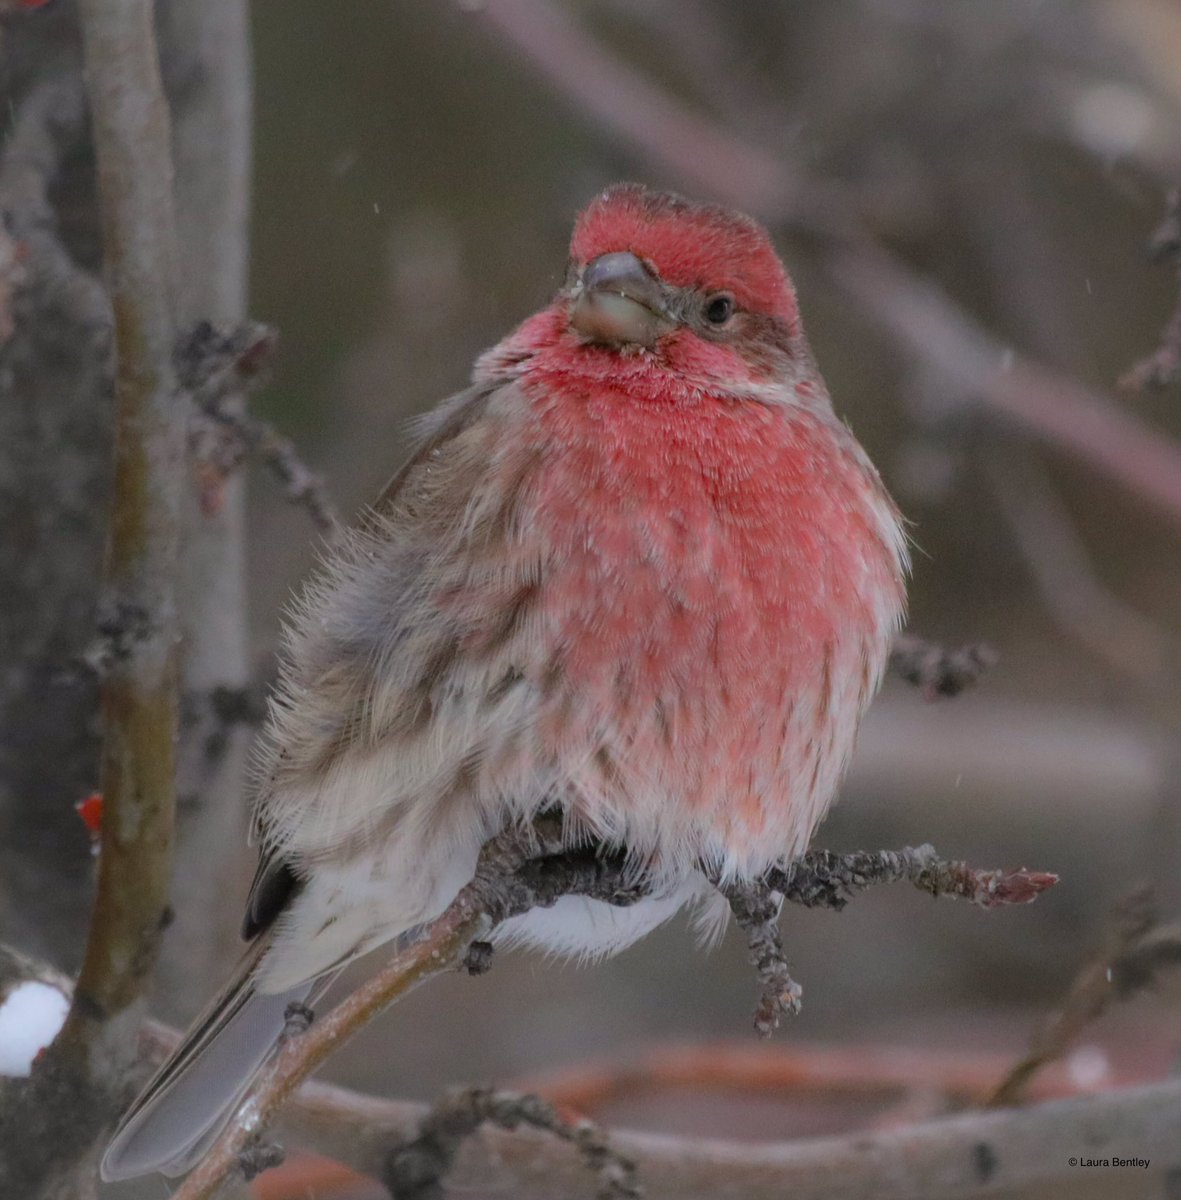 Everyone’s getting their winter floof on, freezing house finch hiding out of the -23c windchill today. Actual temp around -13c. He looks very pink so puffed up, more red when not so,puffy. #BirdsAreBeautiful